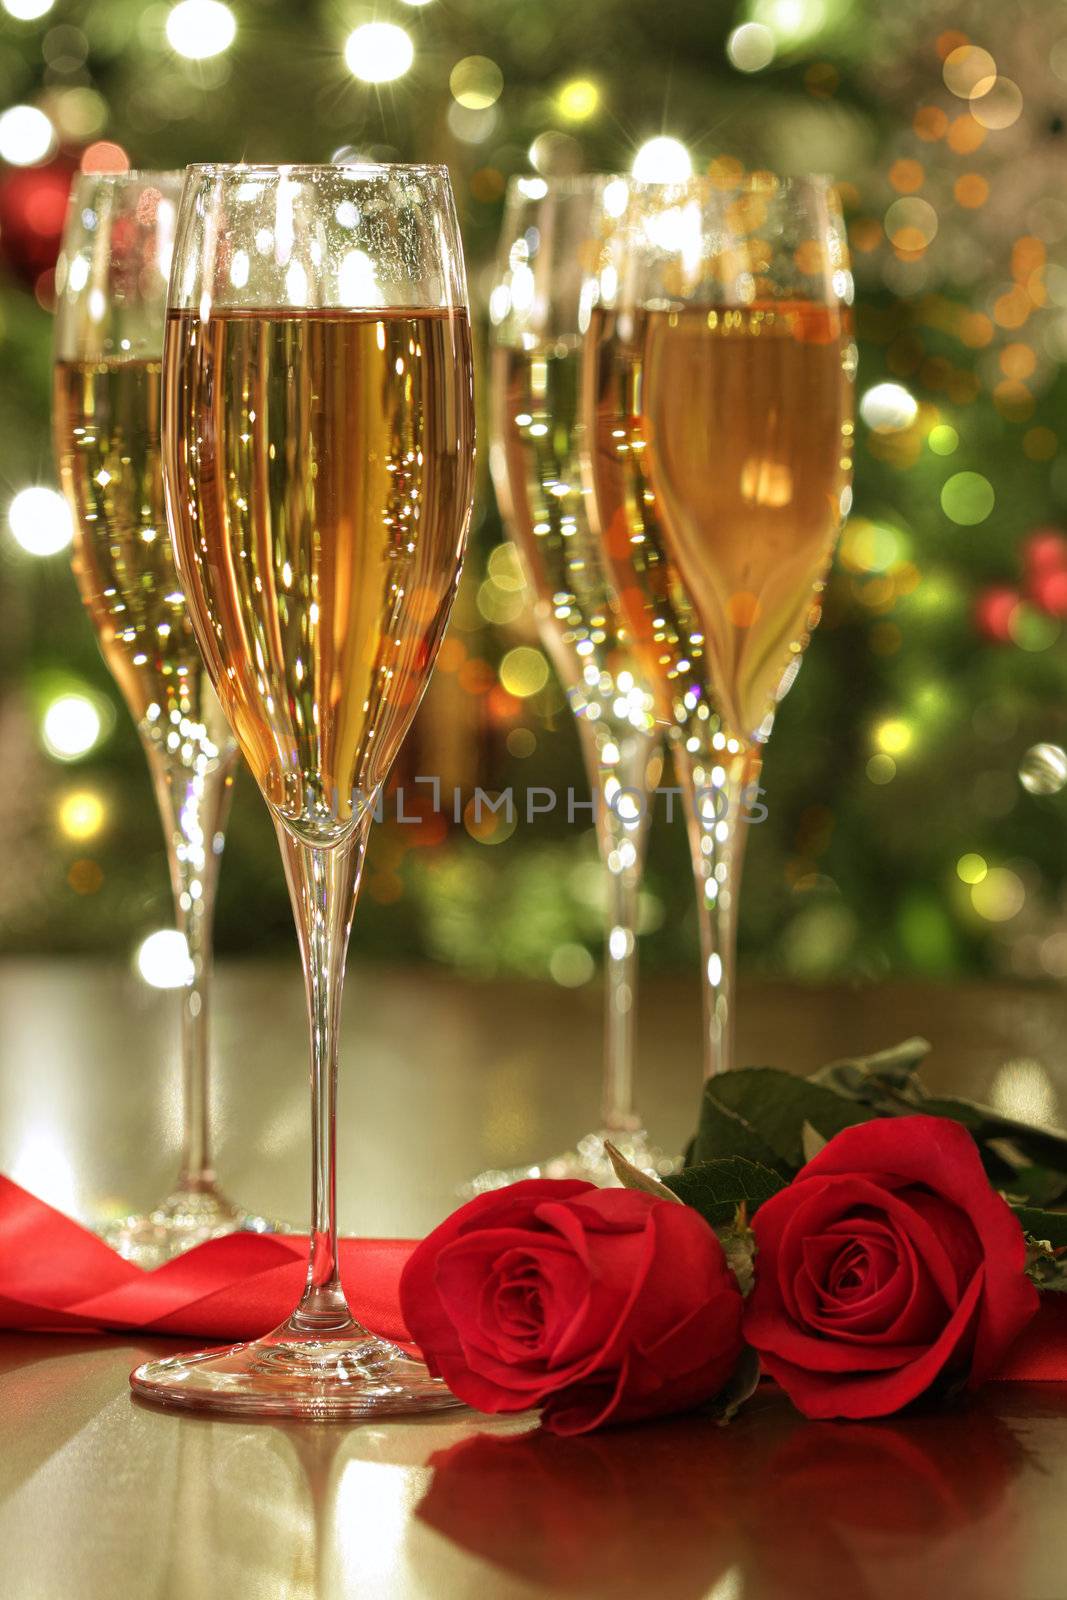 Glasses of champagne and red roses by Sandralise